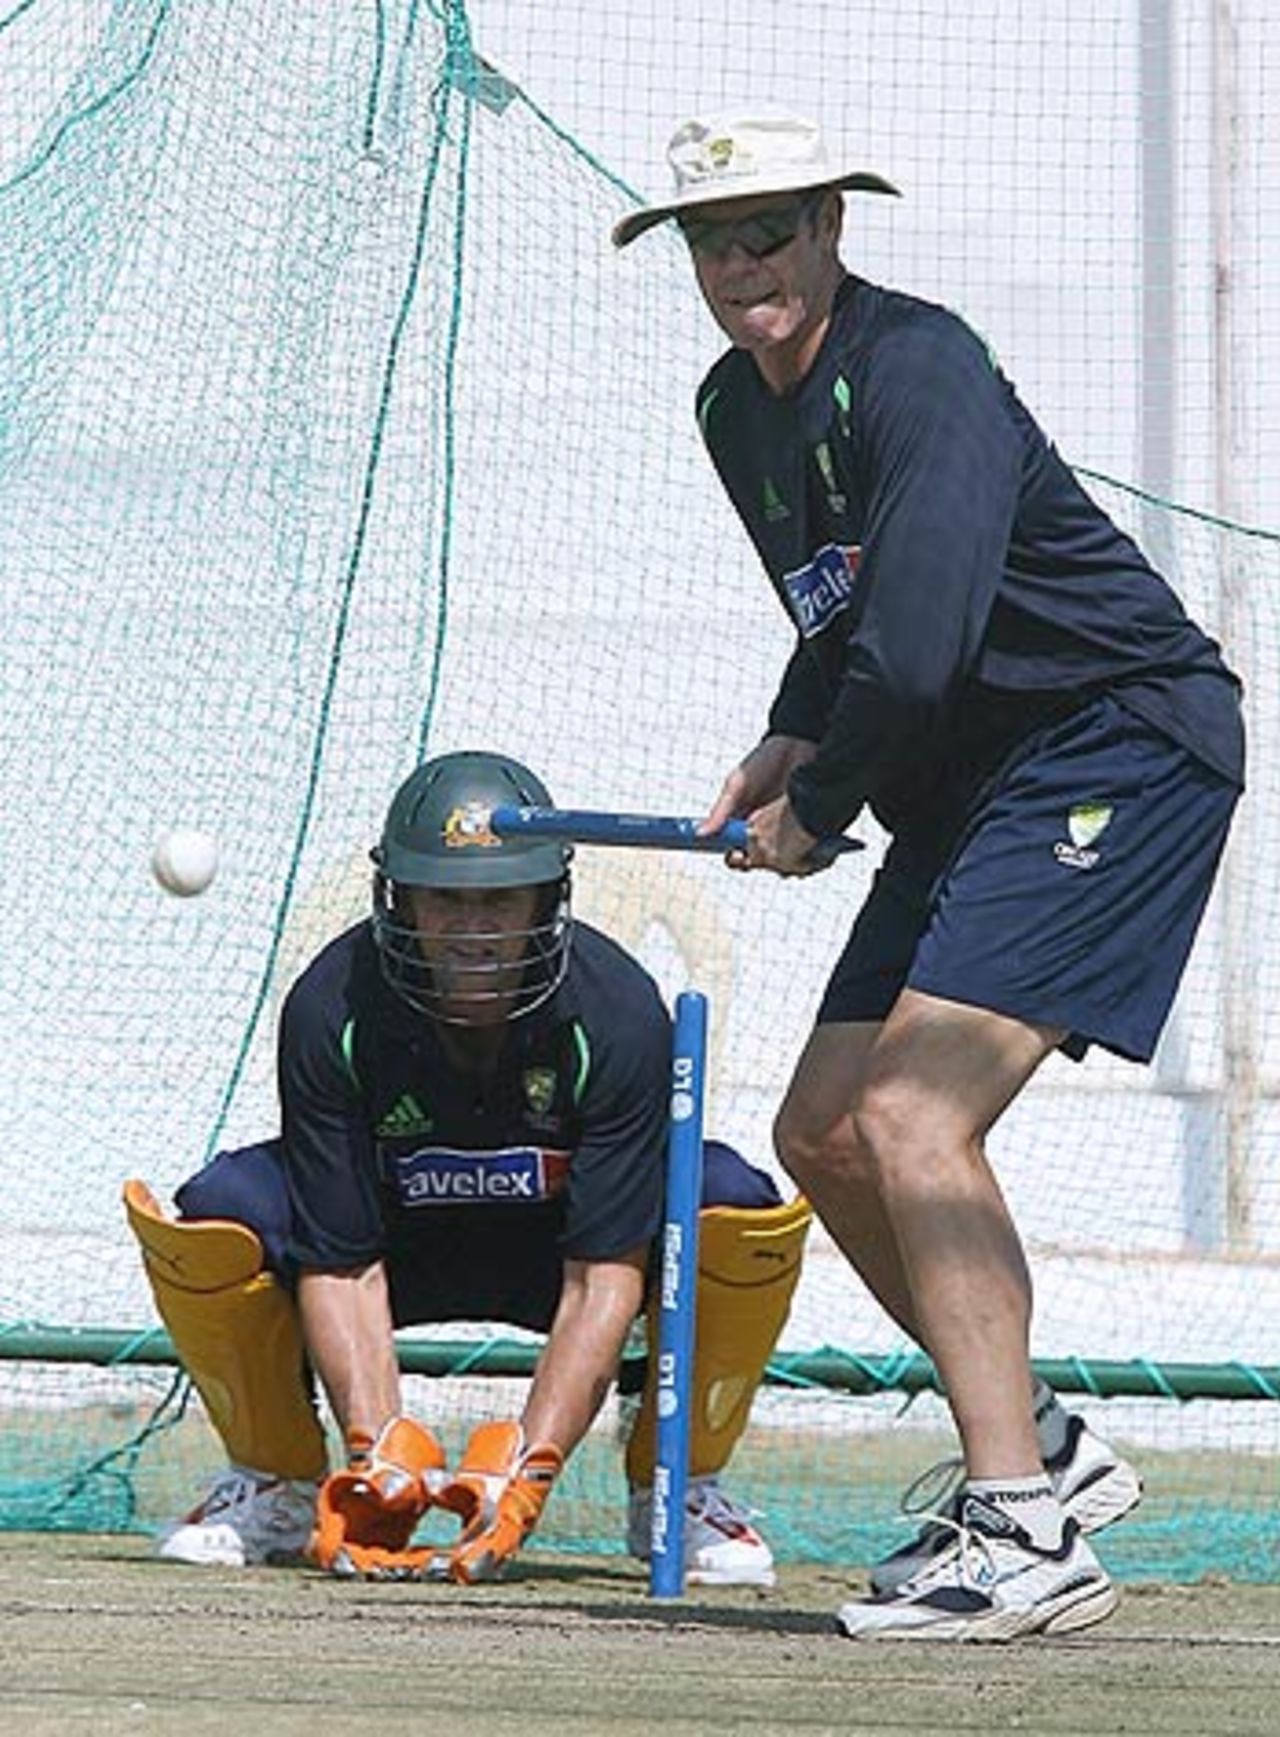 'Let me show you how it works' - John Buchanan faces up at the nets, Jaipur, October 20, 2006